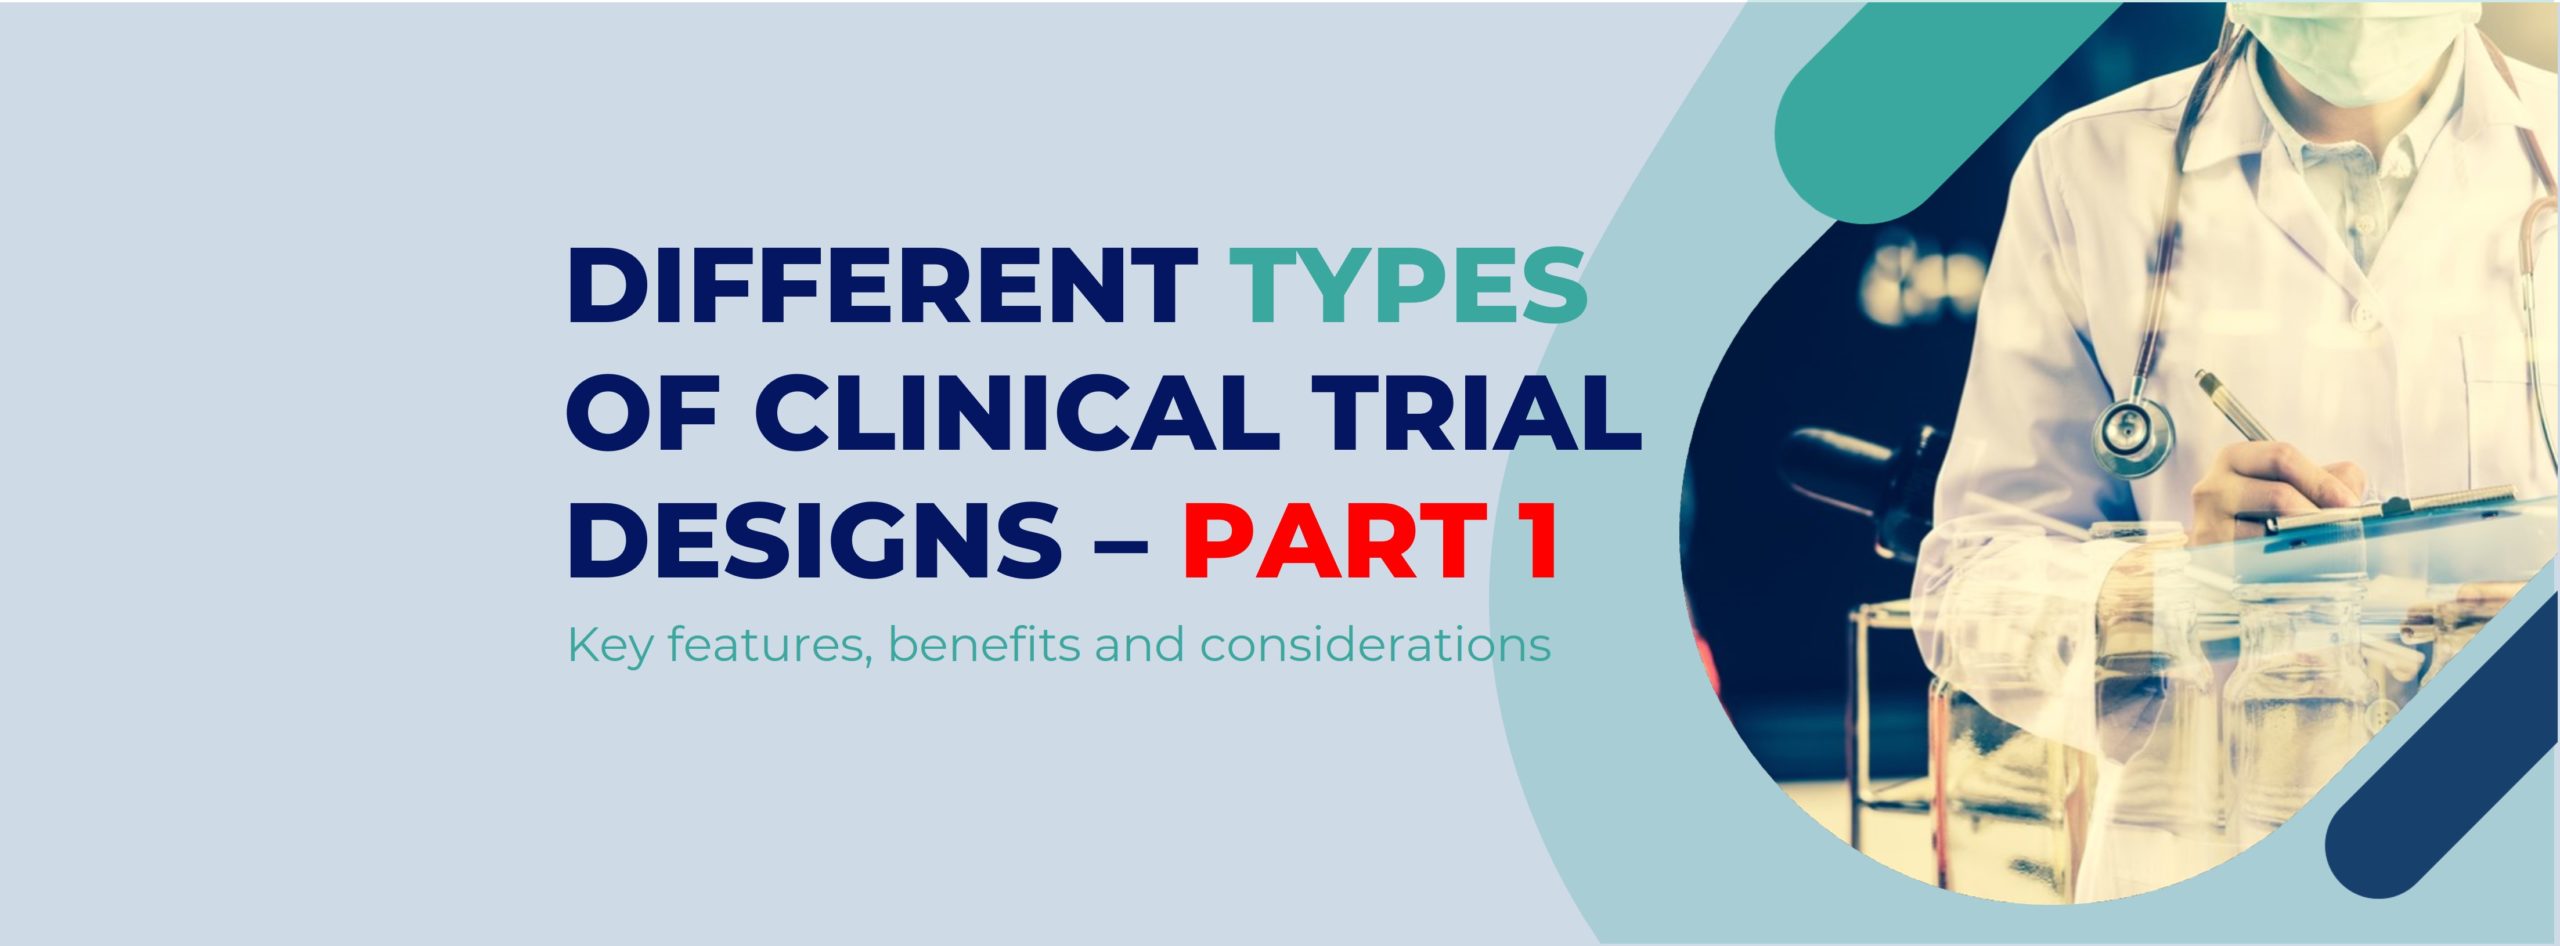 Different types of Clinical Trial Designs